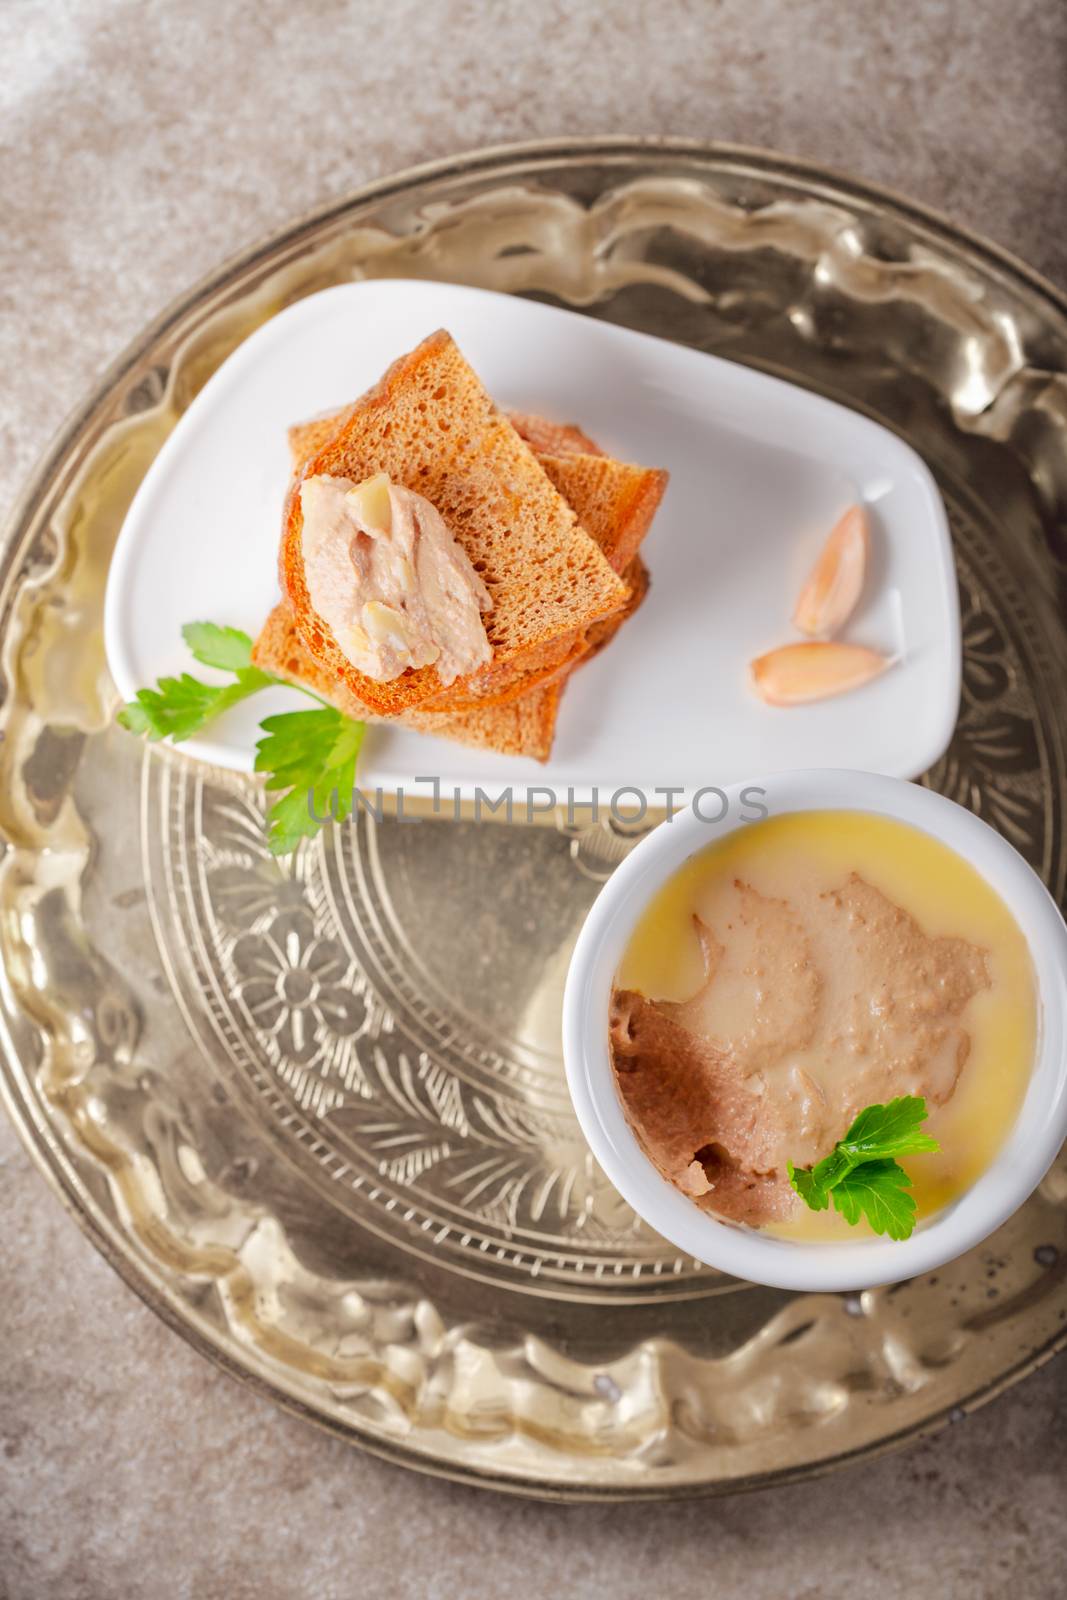 Delicious Chicken Pate by supercat67